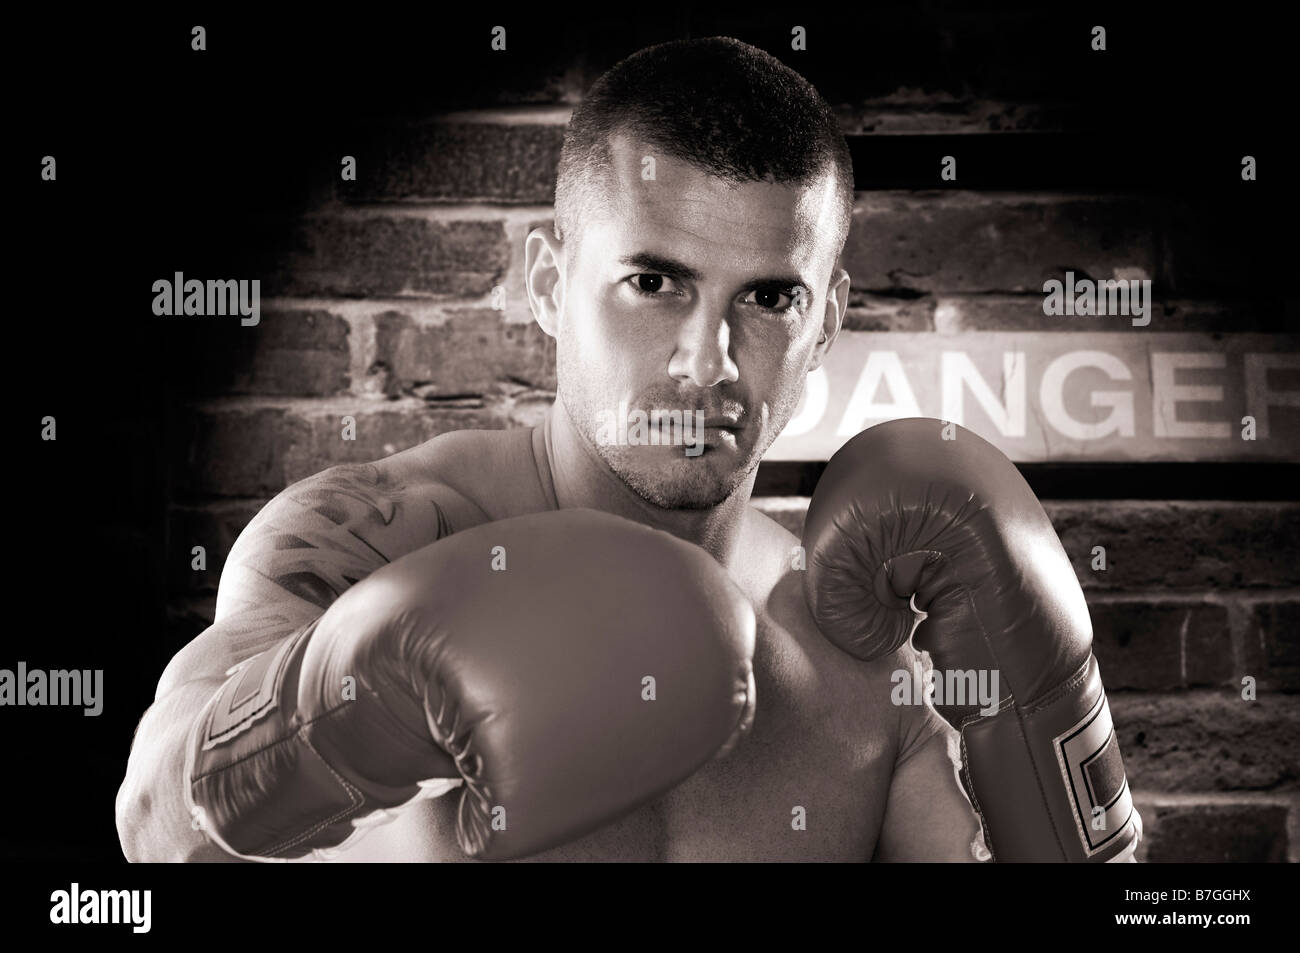 Portrait of a man in boxing gloves Banque D'Images